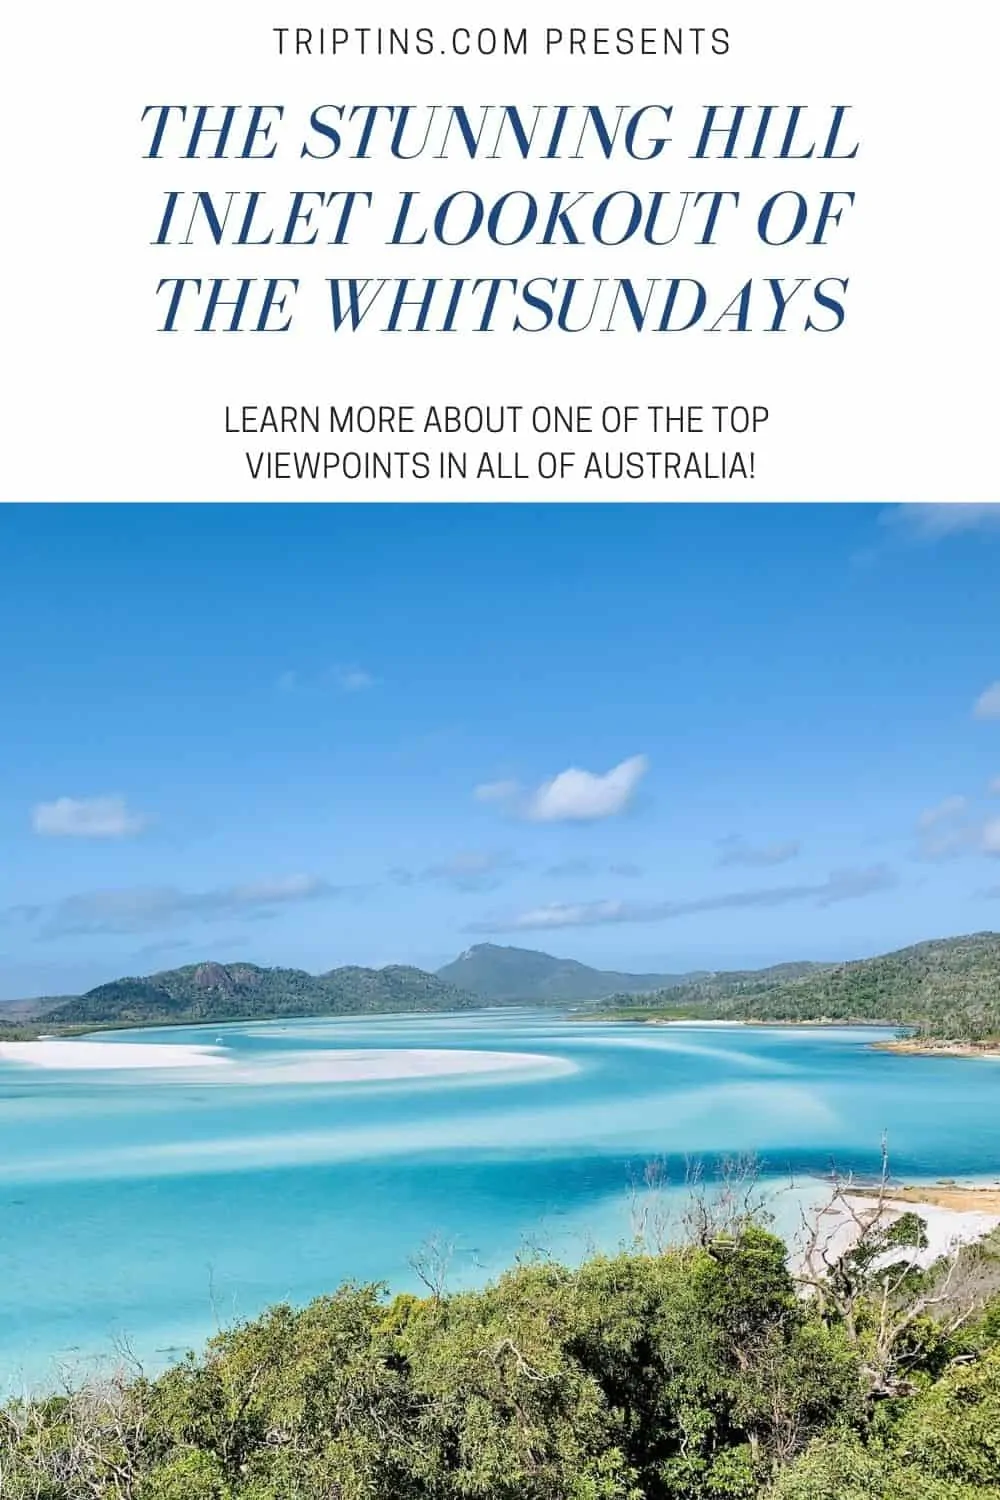 Hill Inlet Lookout Whitsundays Australia